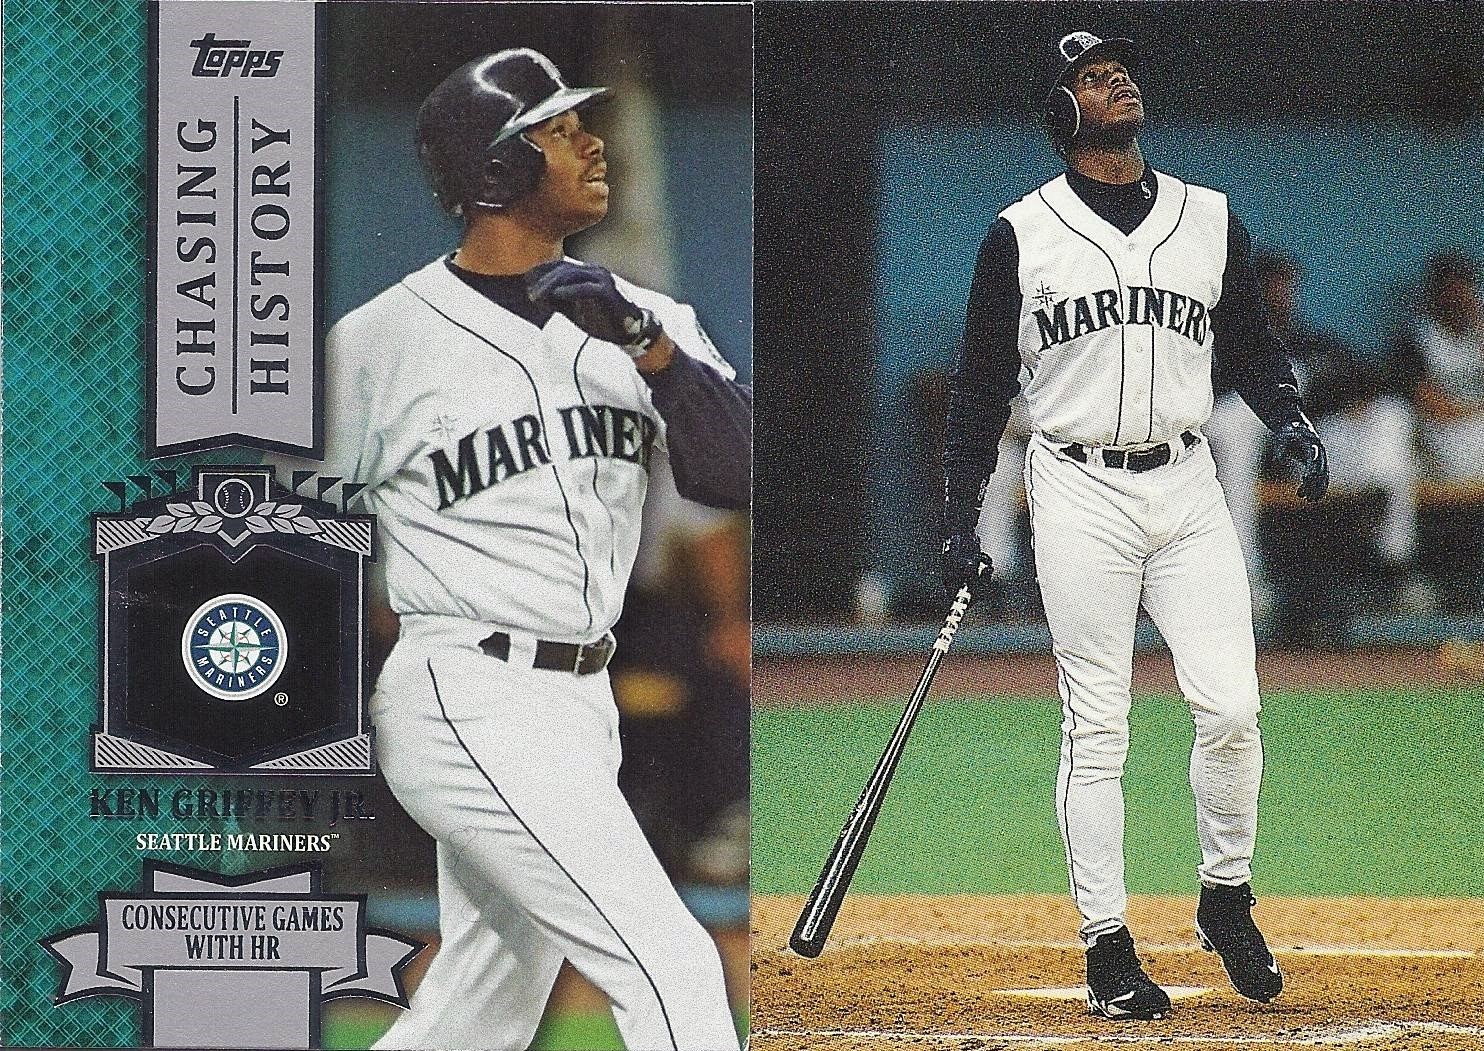 KEN GRIFFEY JR 1999 TOPPS PICTURE PERFECT INSERT #P1 MARINERS ML1 